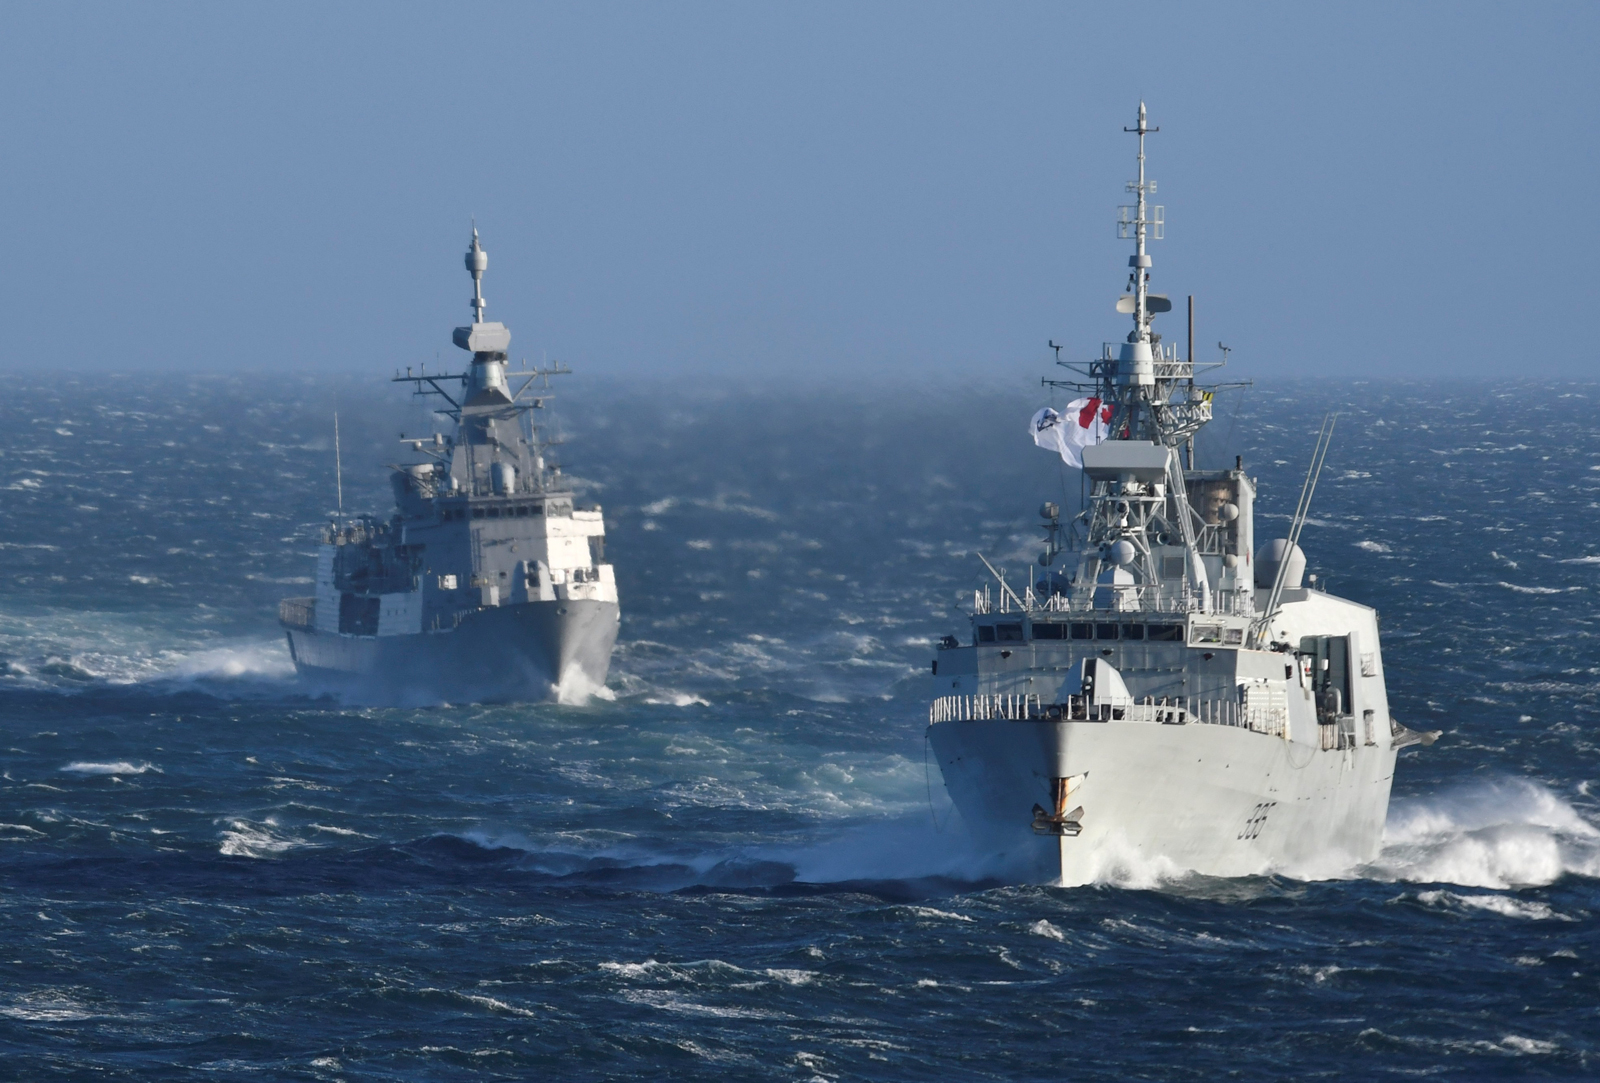 HMNZS Te Kaha (left) and HMCS Calgary (right) conduct a sail past Esquimalt Lagoon as Te Kaha heads back to New Zealand after spending 18 months in Esquimalt completing an extensive upgrade and refit program.